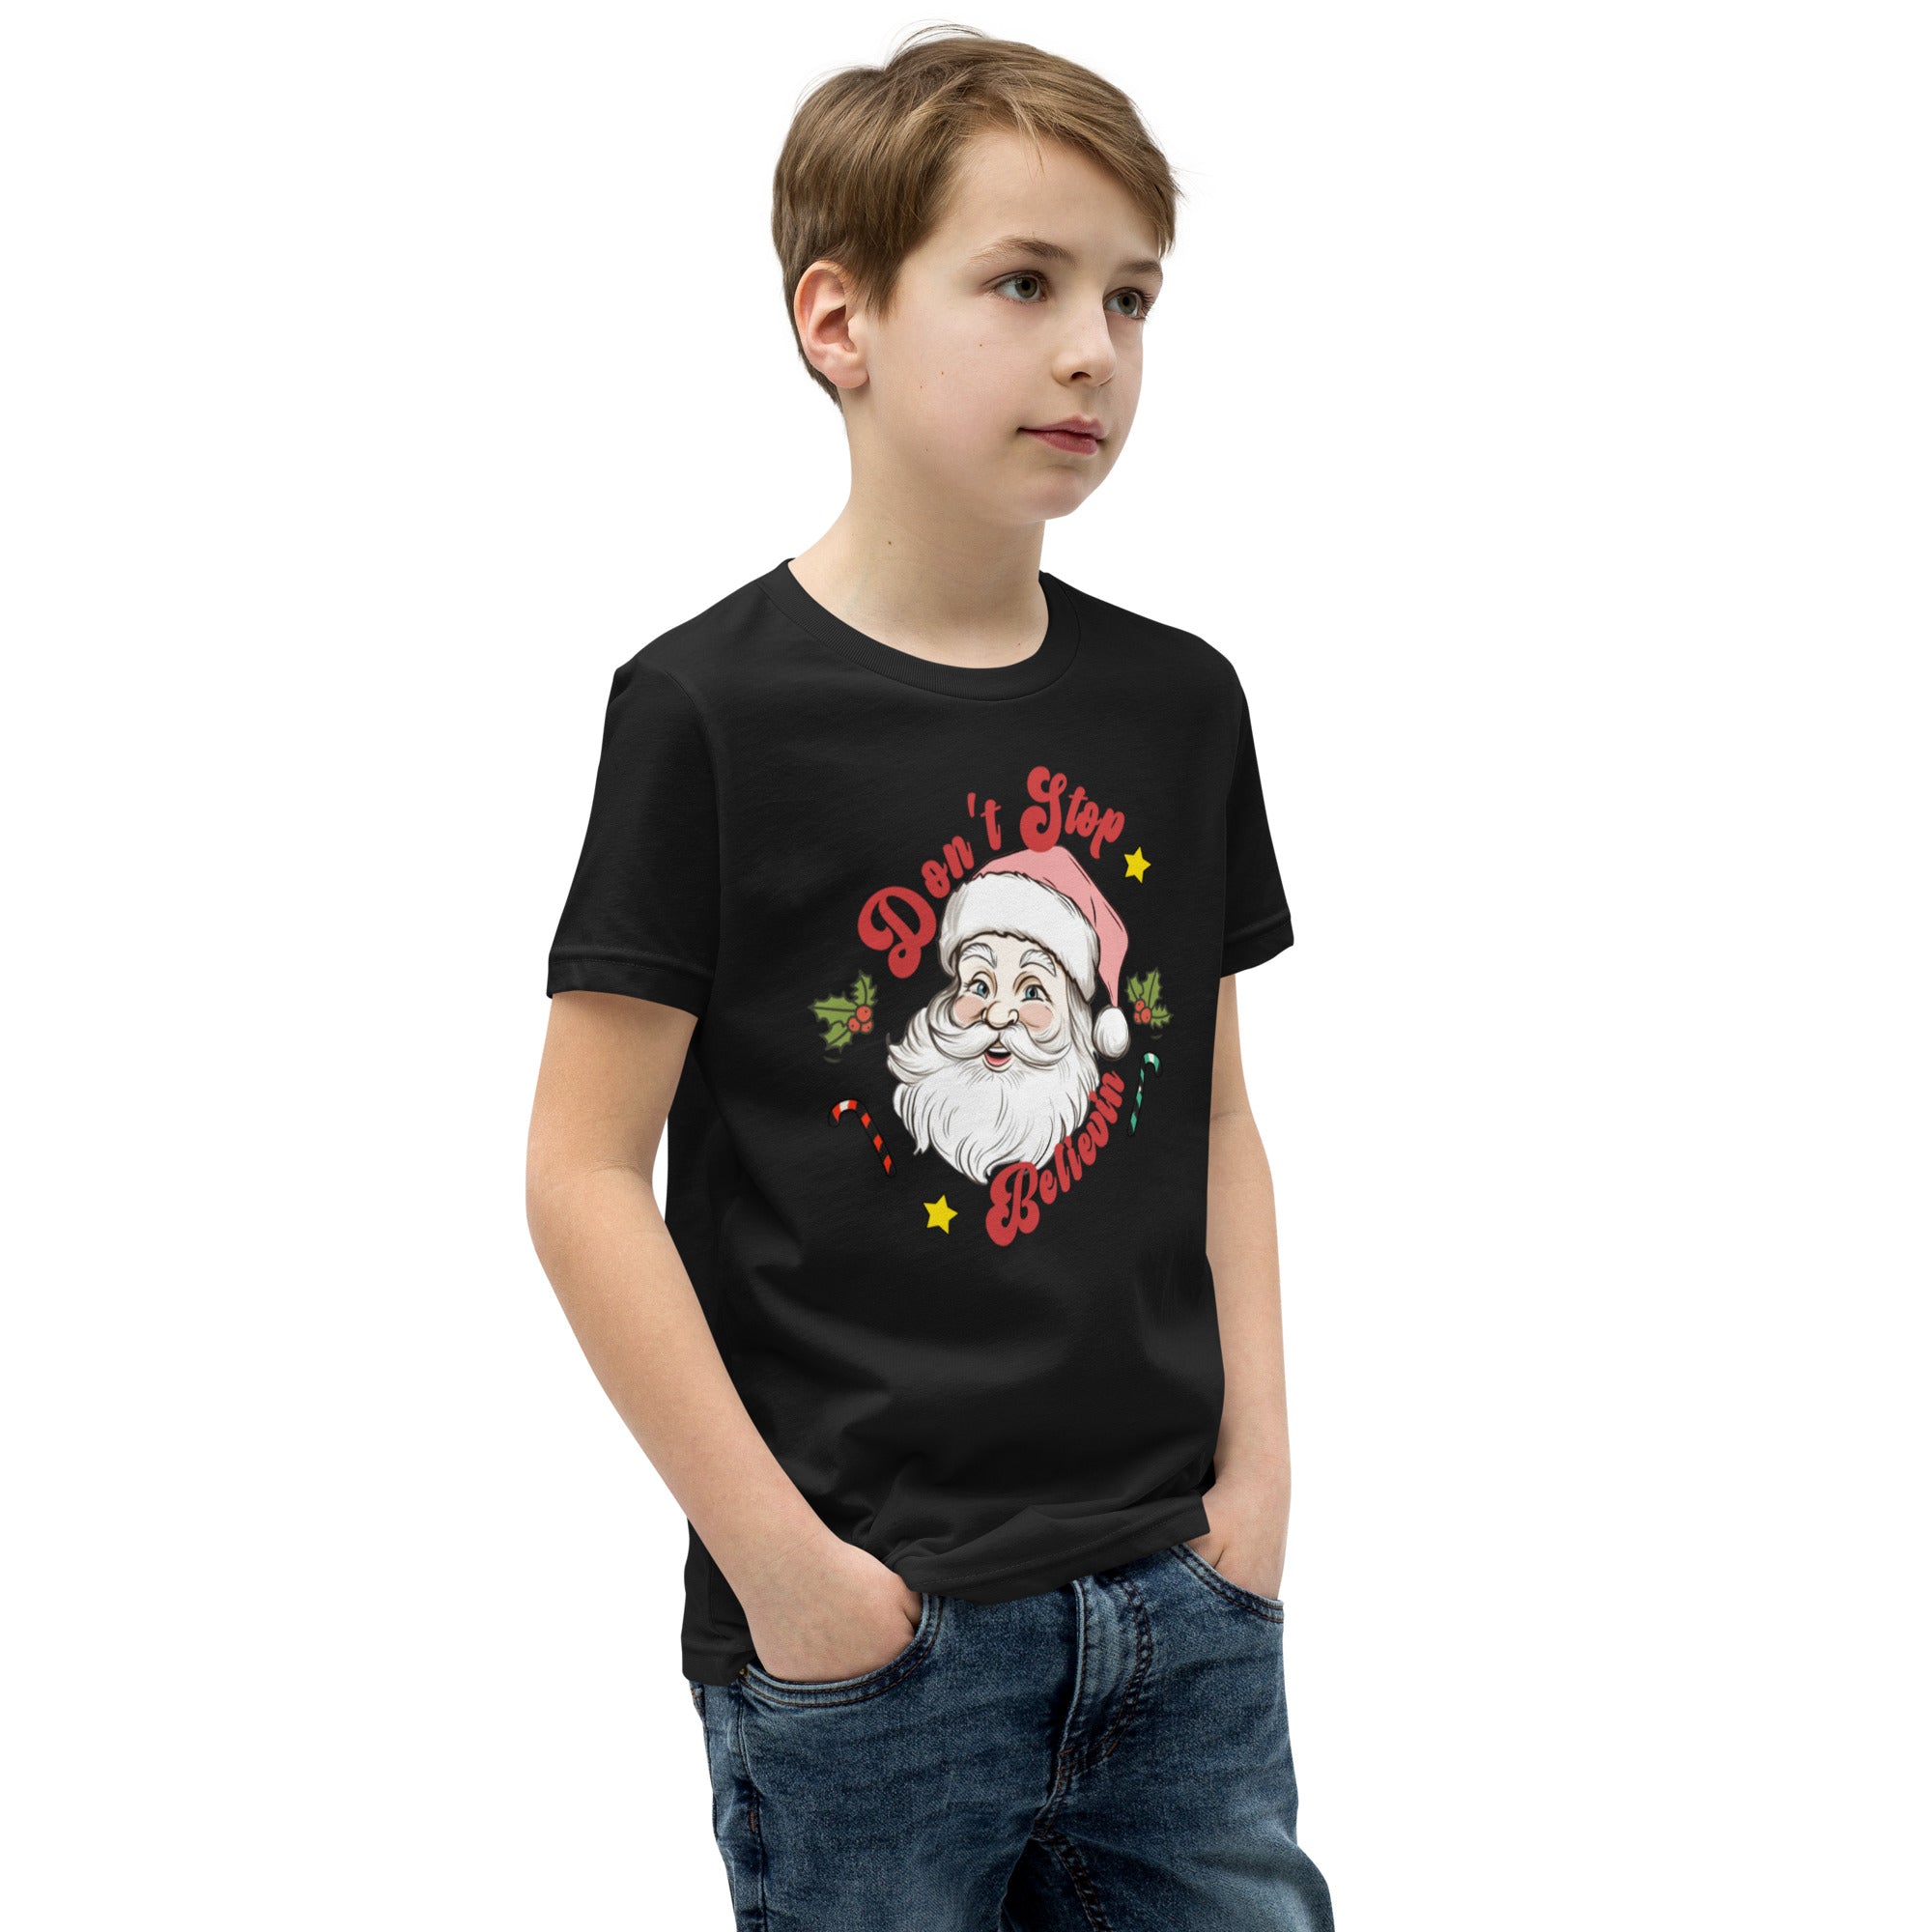 Youth Short Sleeve T-Shirt, Don't Stop Believing T Shirt, Christmas T shirt